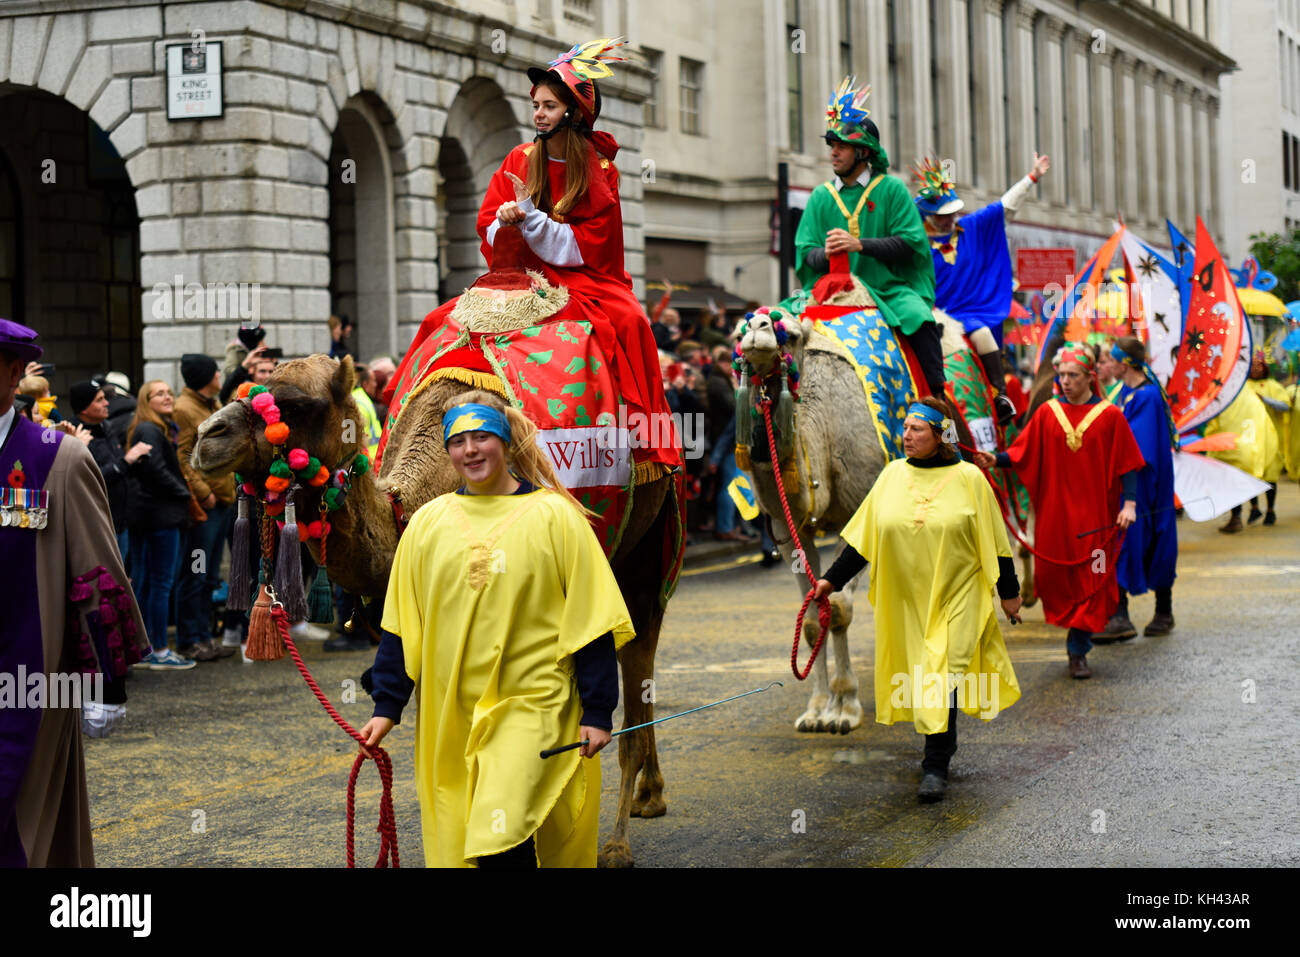 The Worshipful Company of Grocers camel train at the Lord Mayor's Show Procession Parade along Cheapside, London. Camels in the City. Space for copy Stock Photo